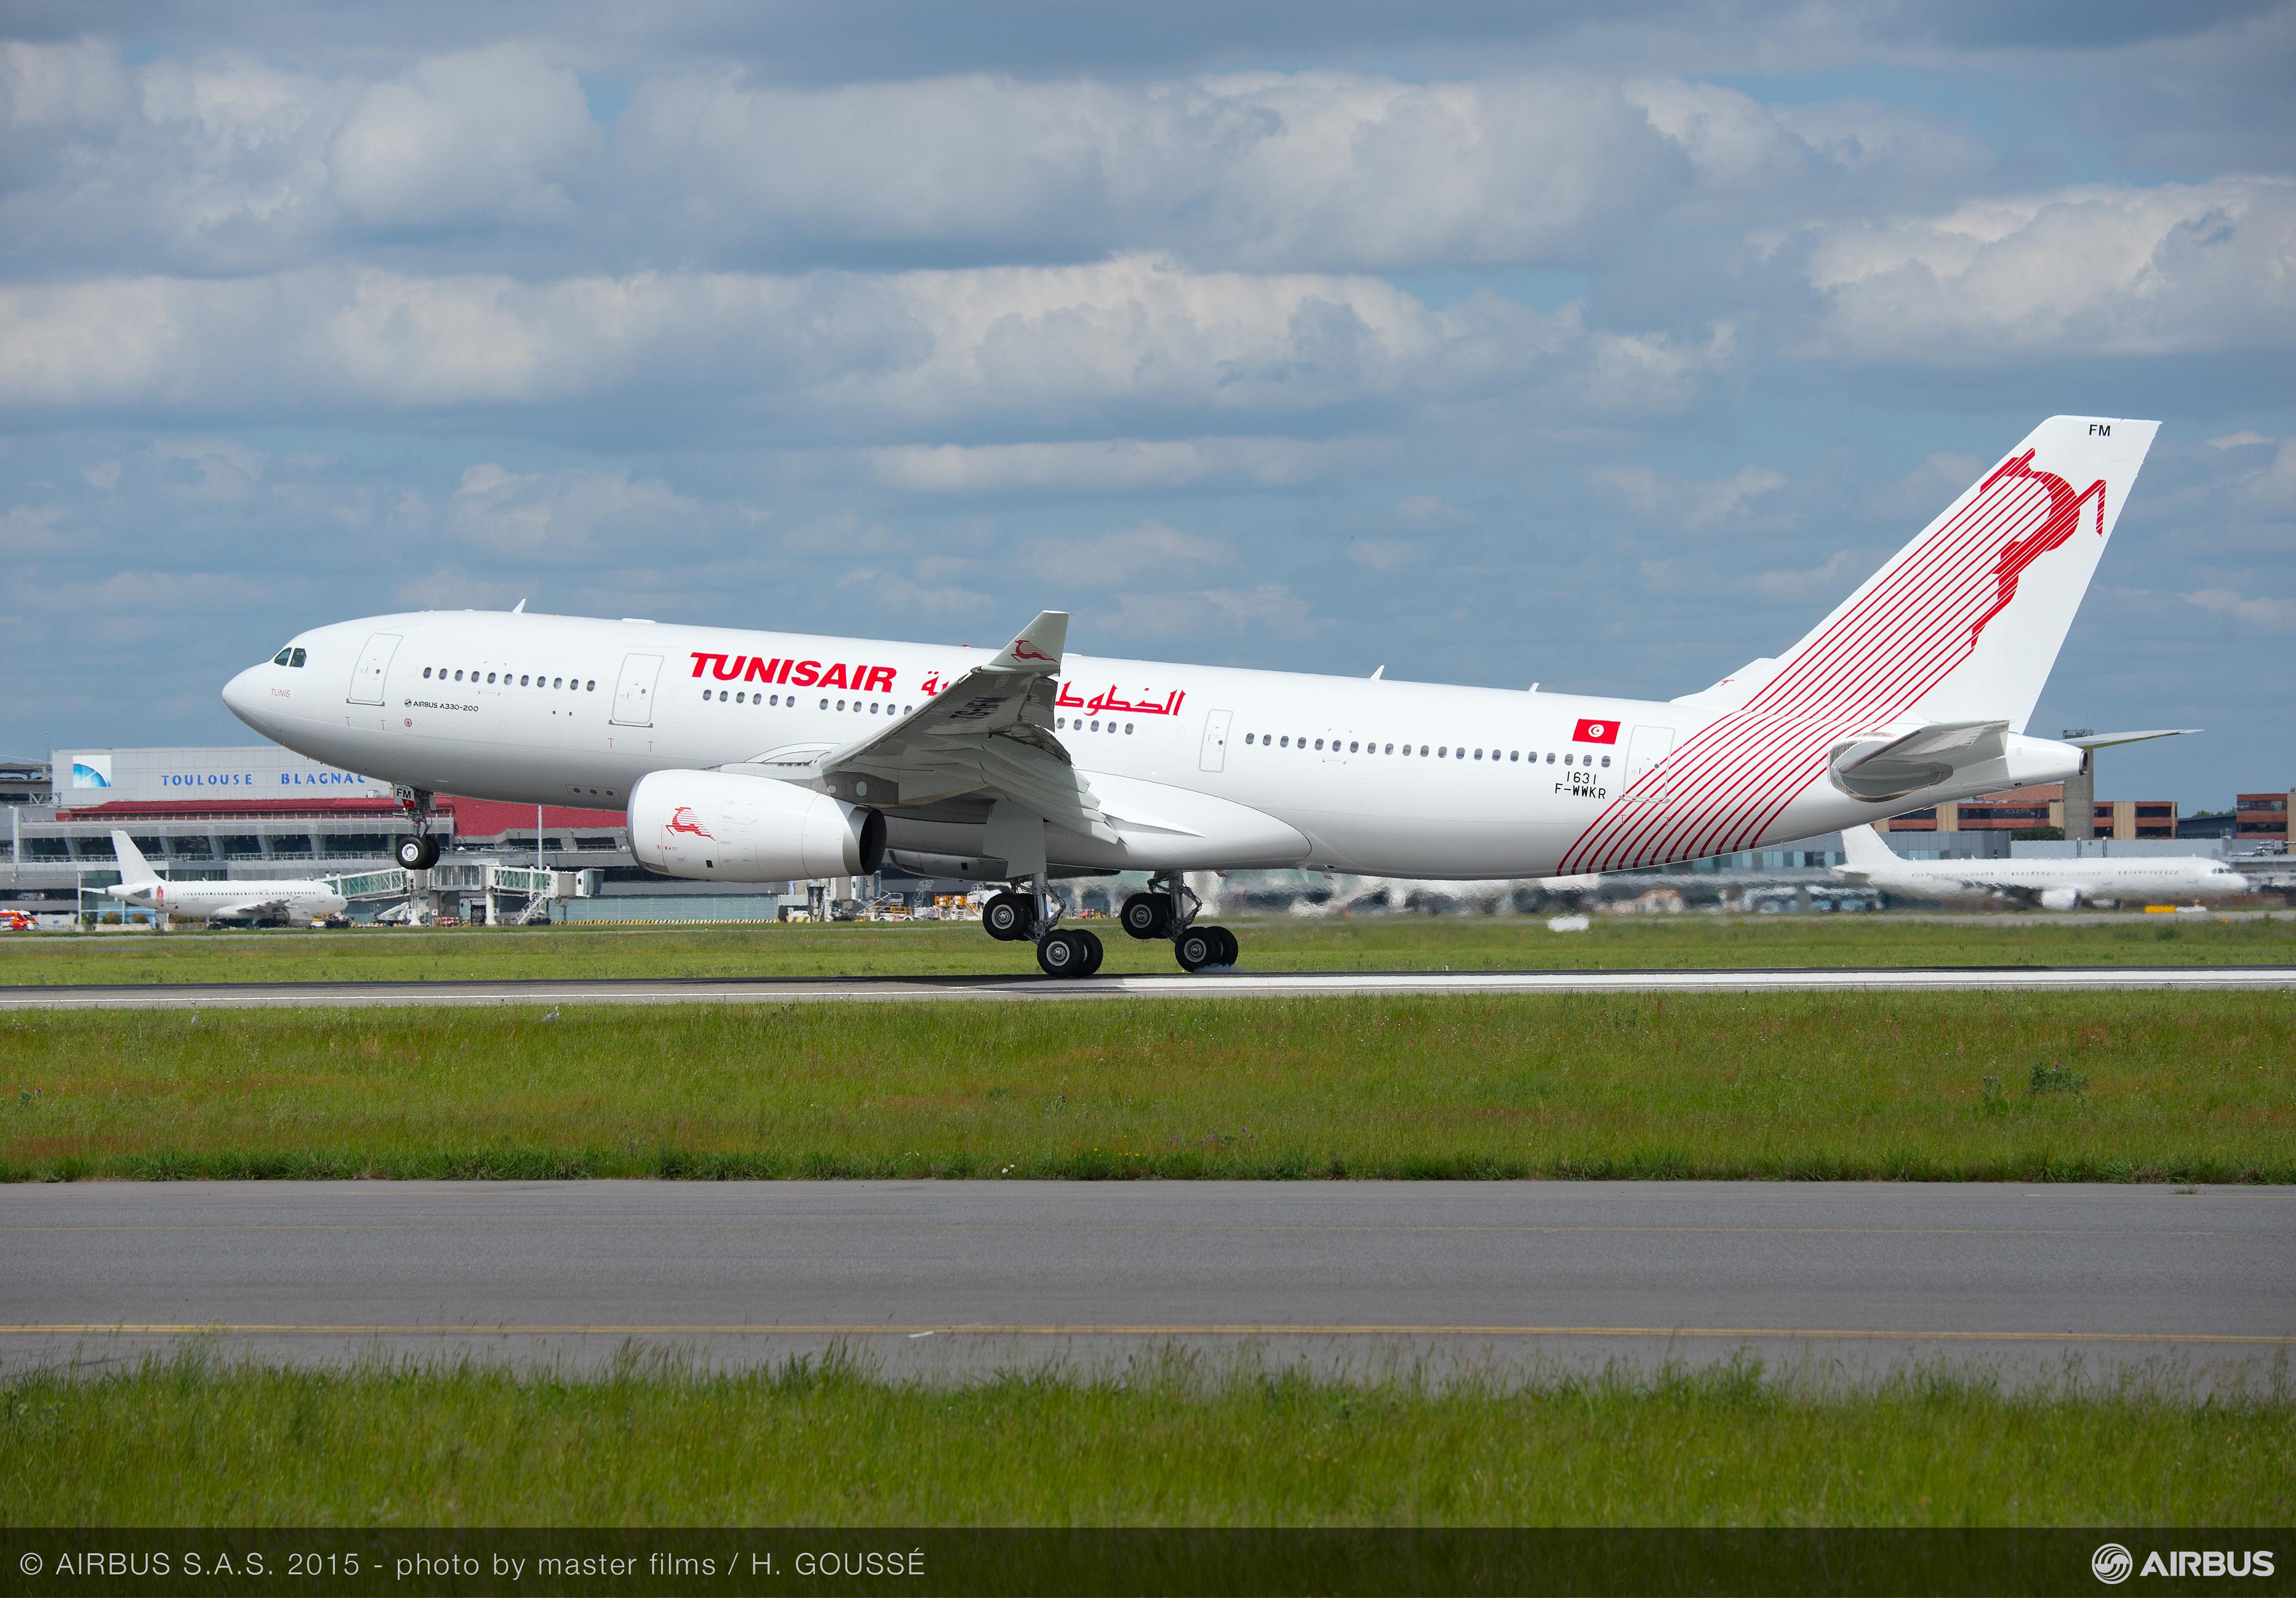 Tunisairs First Airbus A330 Delivered Airport Spotting